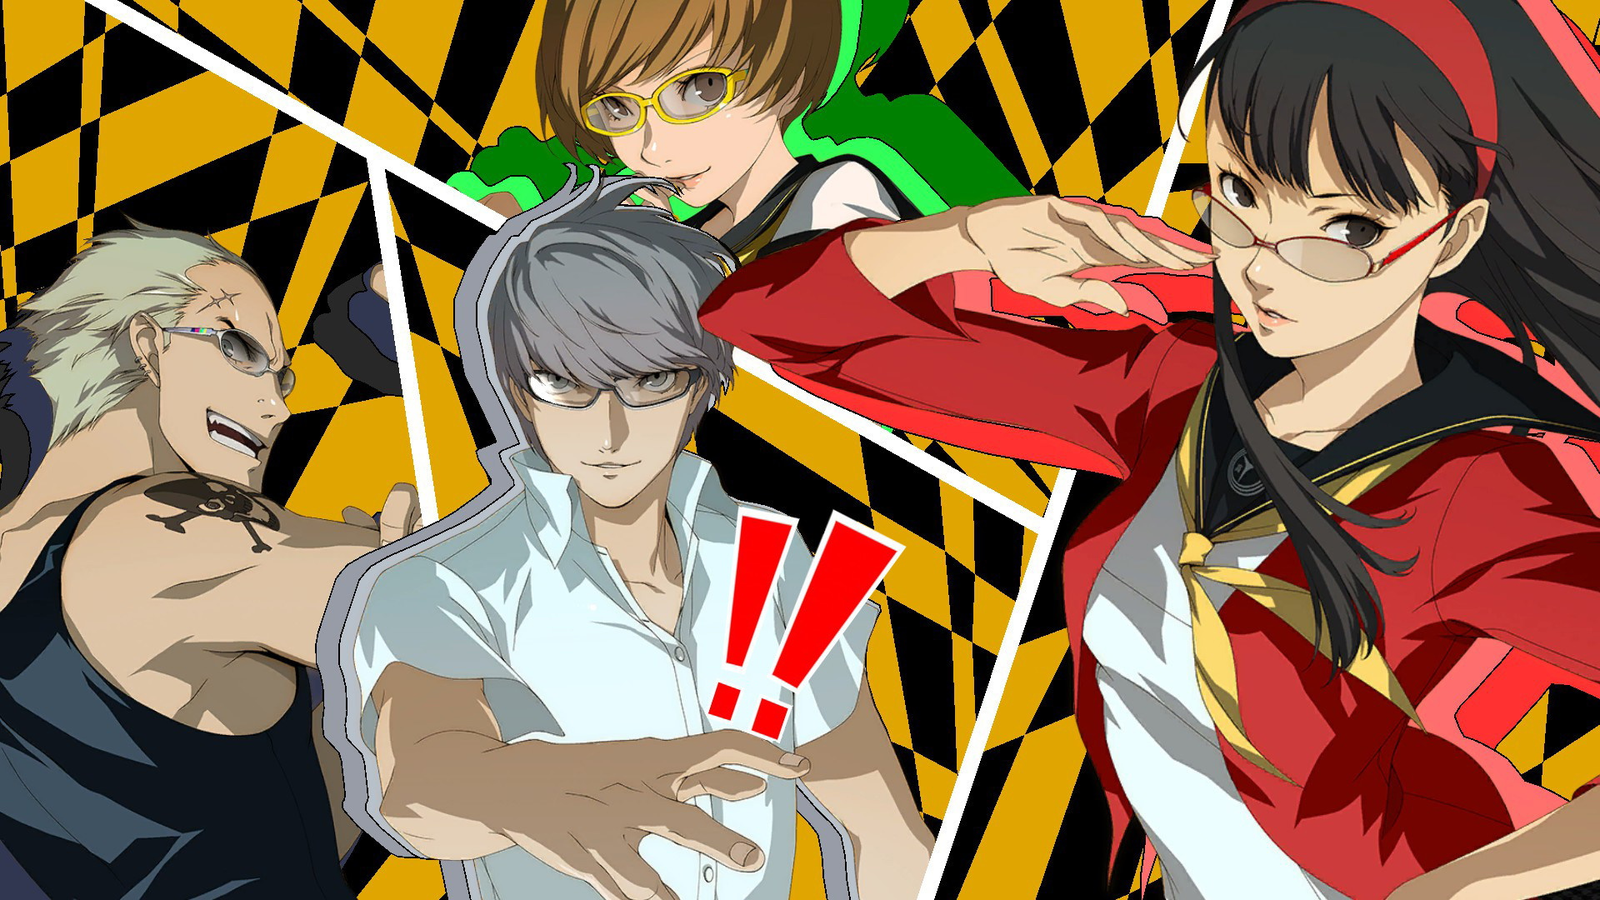 Persona 4 Golden test answers, including how to ace all exams and